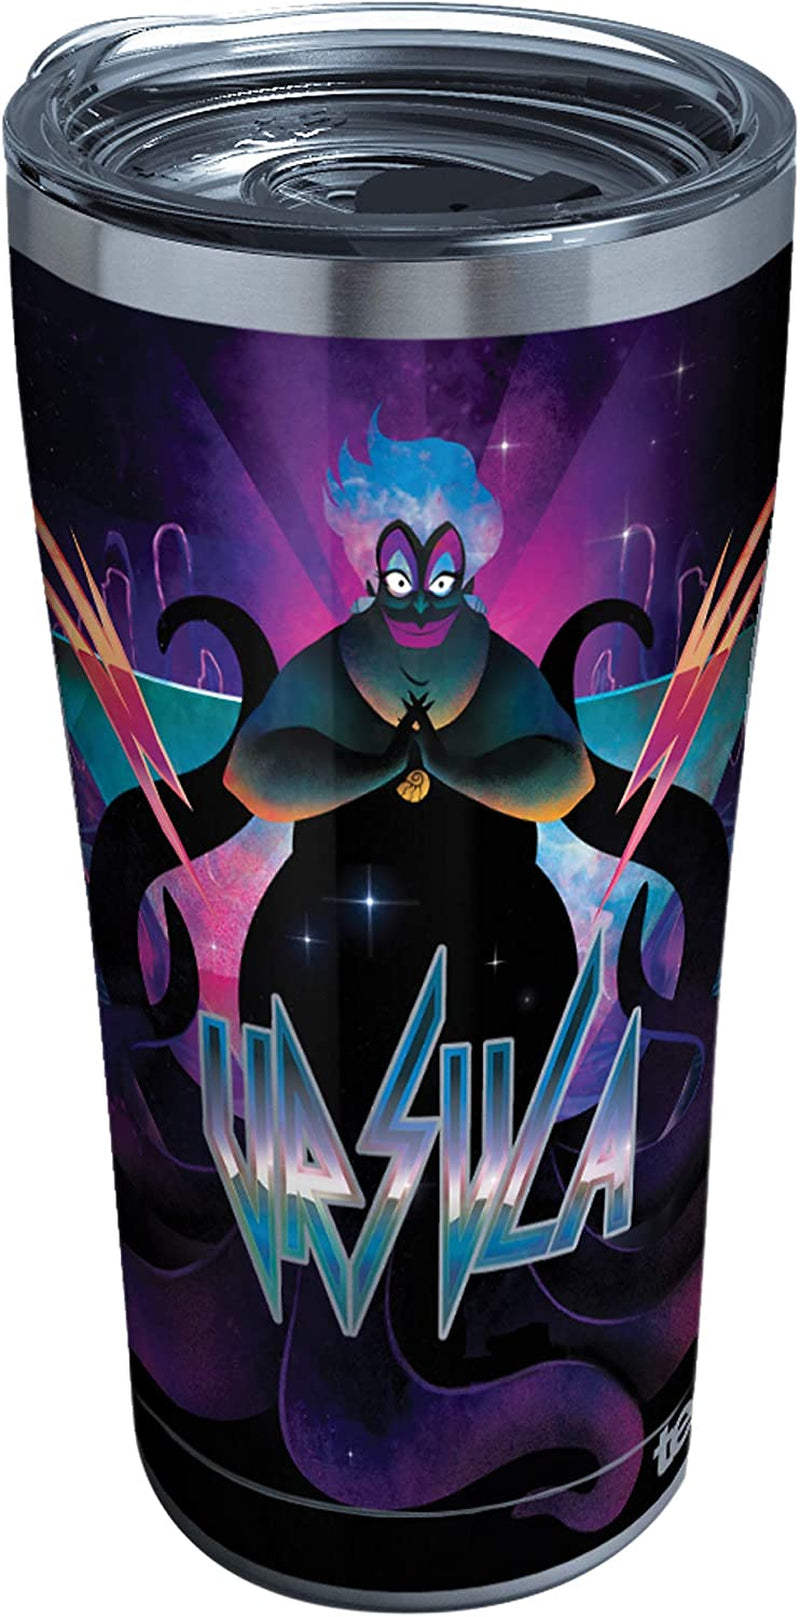 Tervis Triple Walled Disney Villains Insulated Tumbler Cup Keeps Drinks Cold & Hot, 20Oz, Maleficent